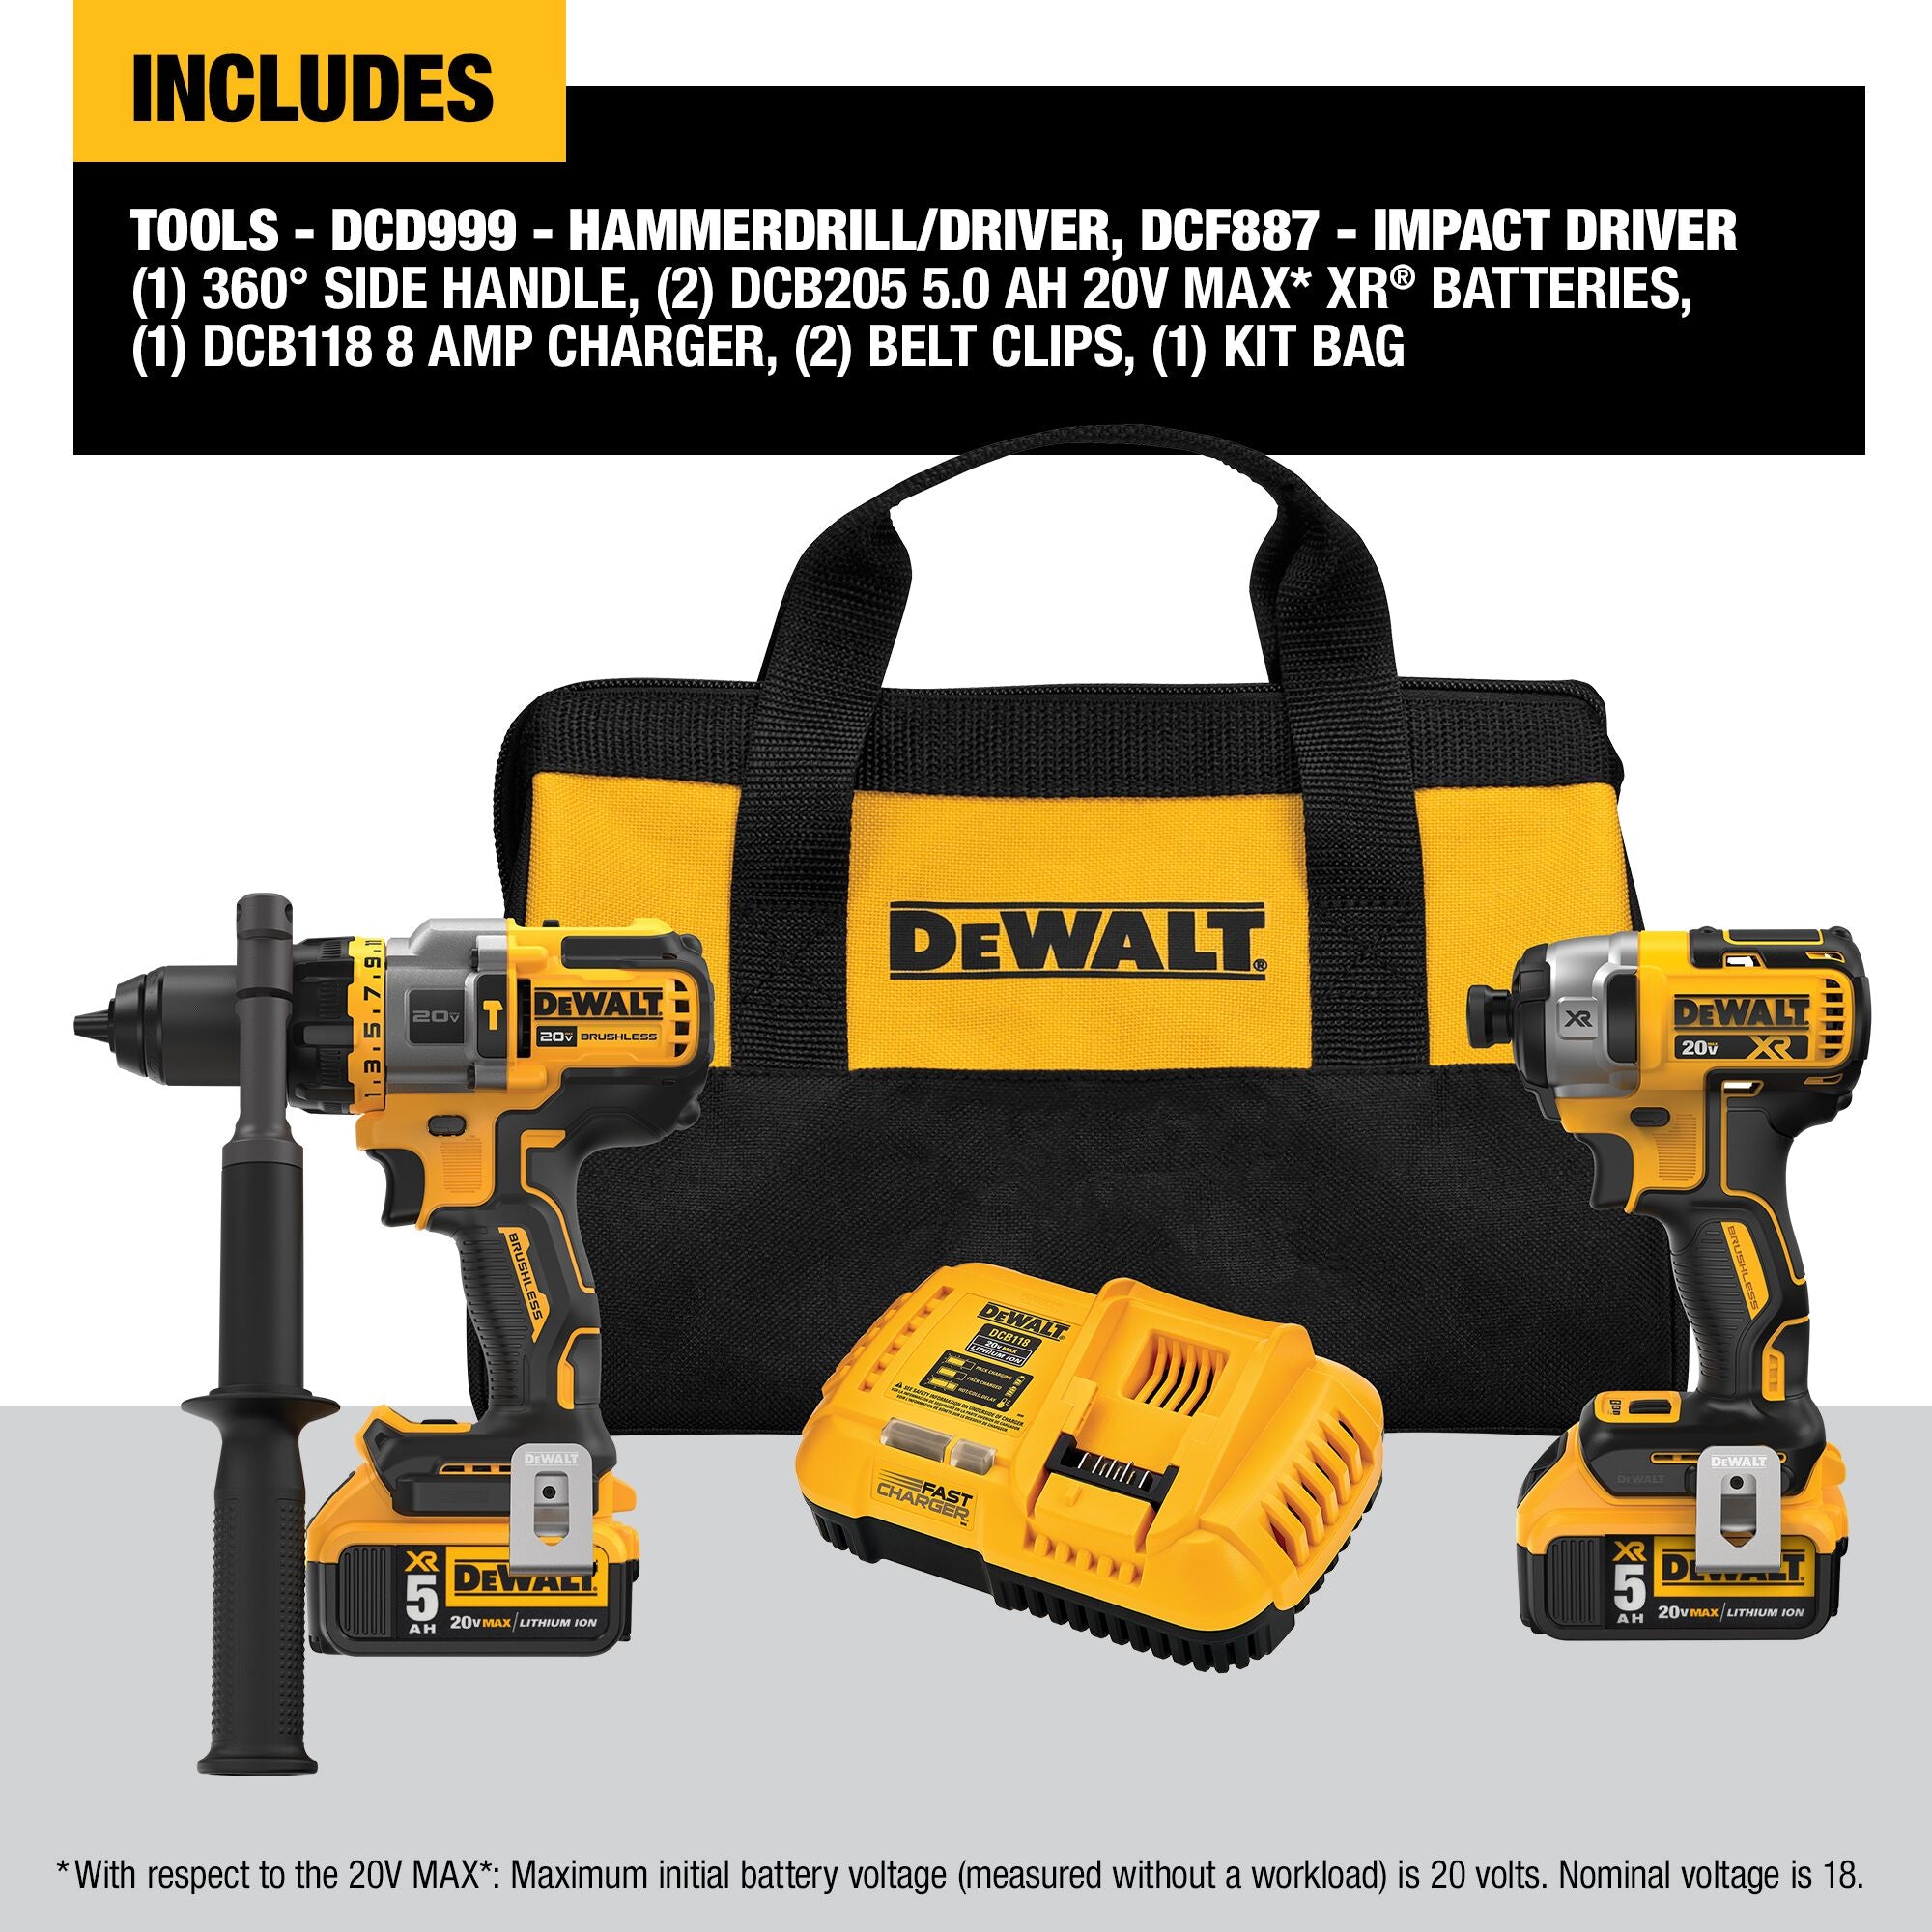 DeWALT DCK2100P2 Drill & Impact Kit with Charger, Drill DCD999B and DCF887 Two Batteries, and Bag.